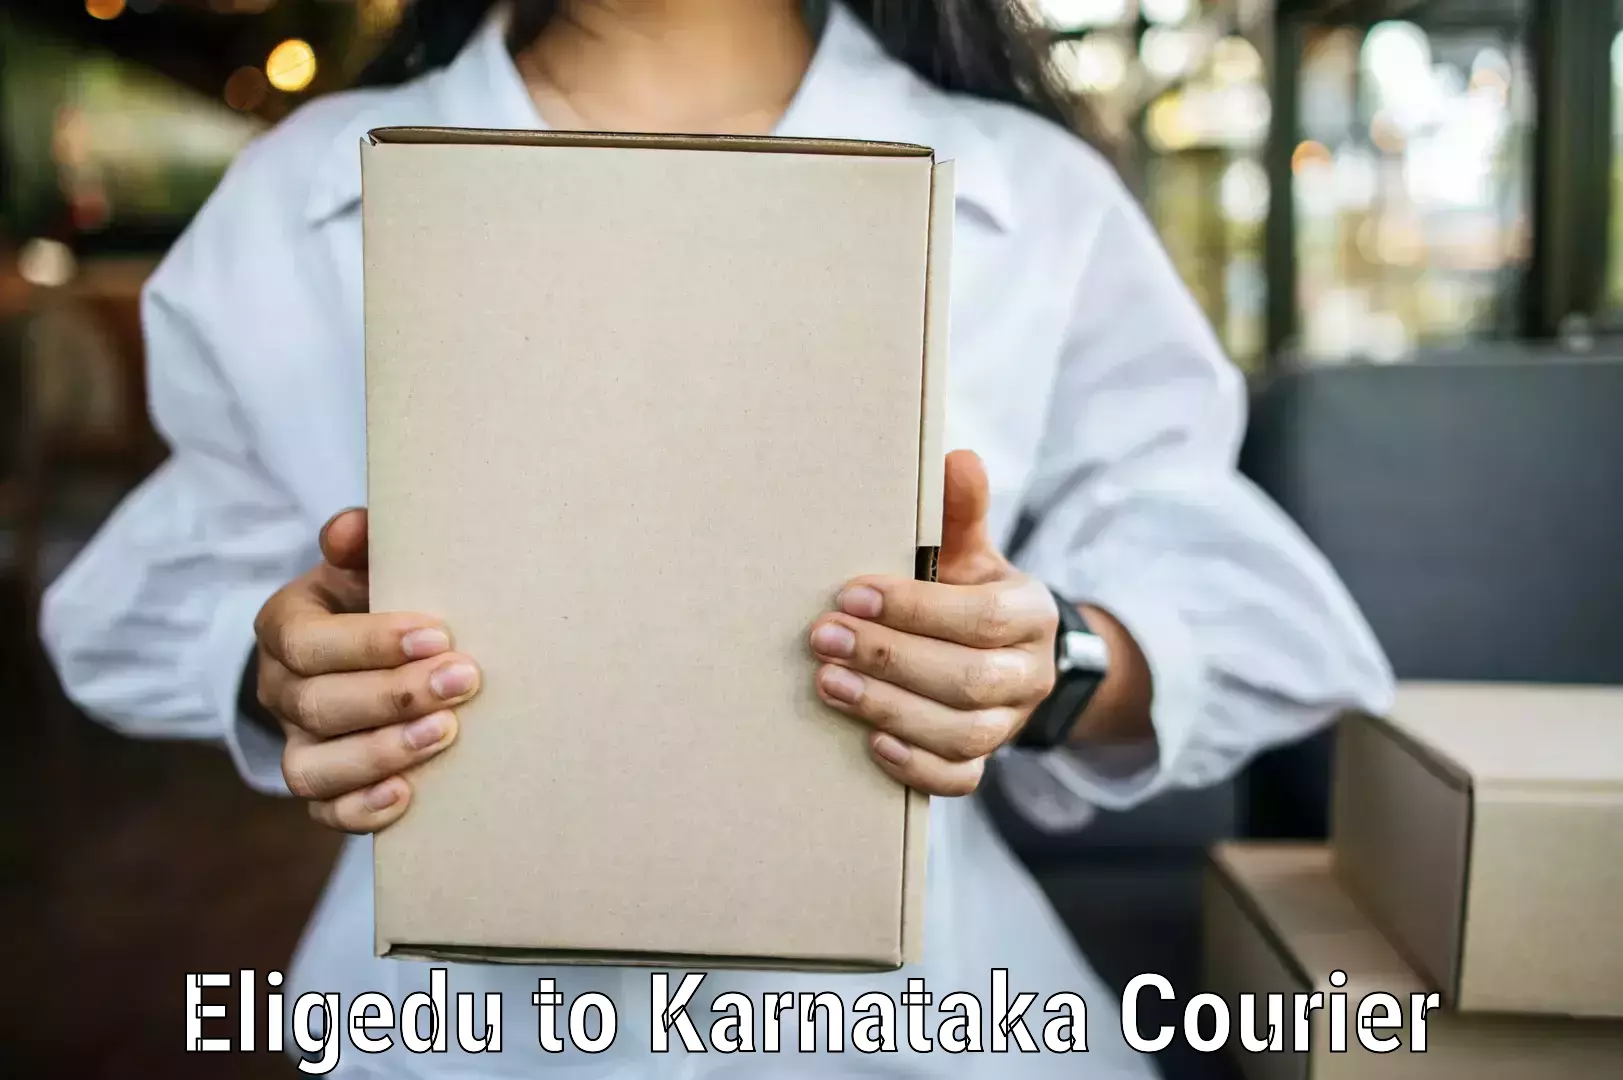 Reliable courier services Eligedu to Shanivarasanthe